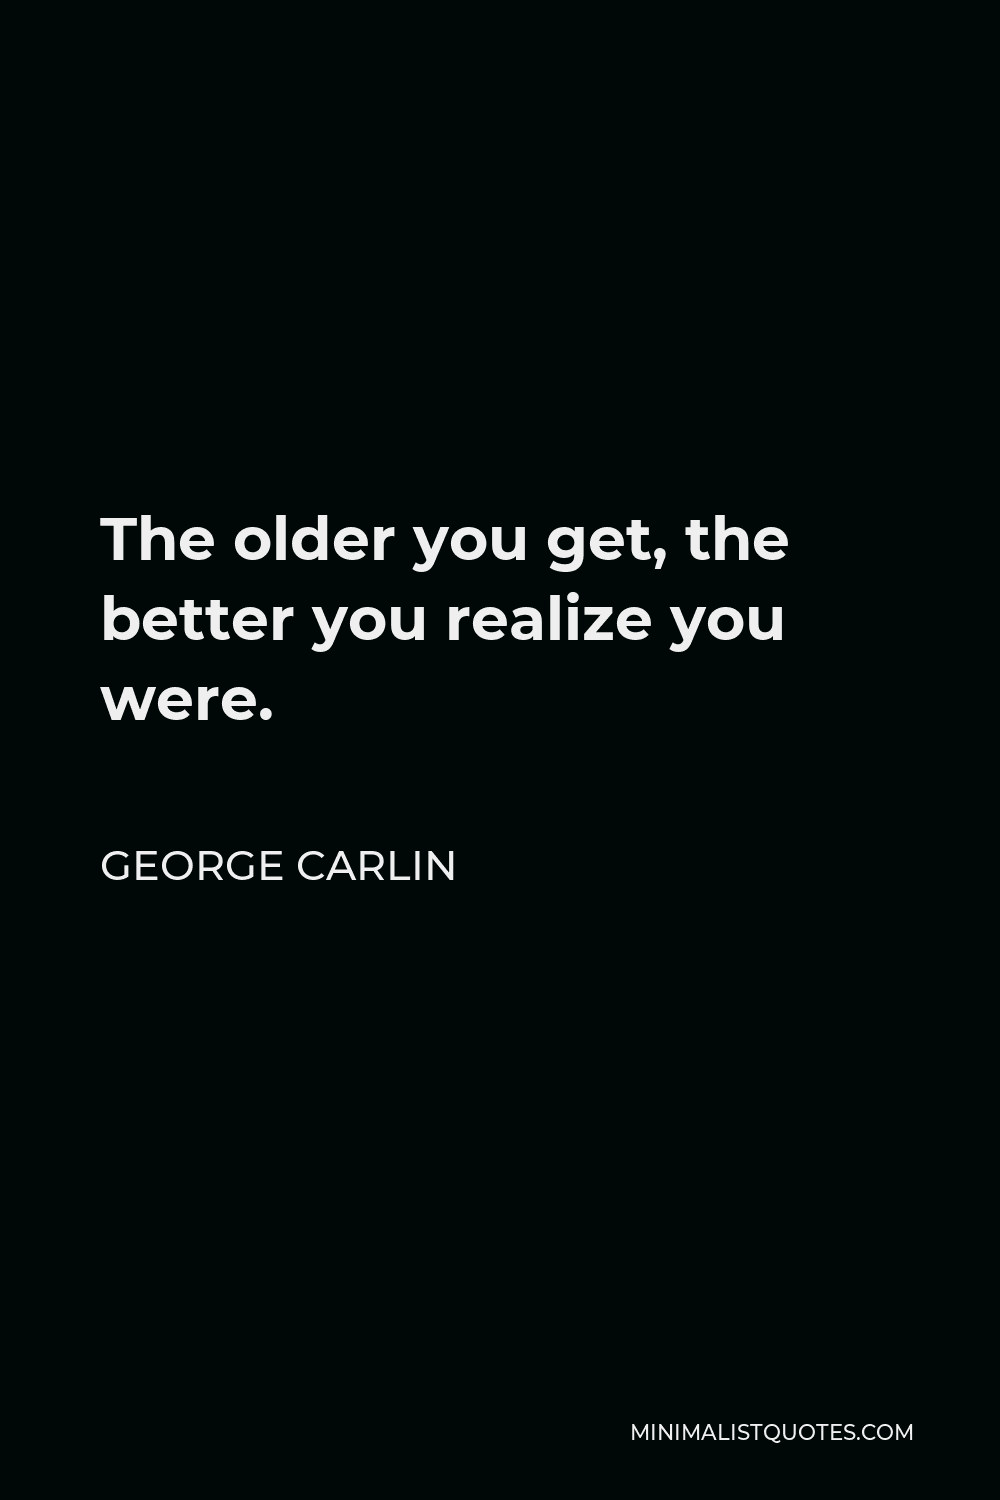 George Carlin Quote - The older you get, the better you realize you were.